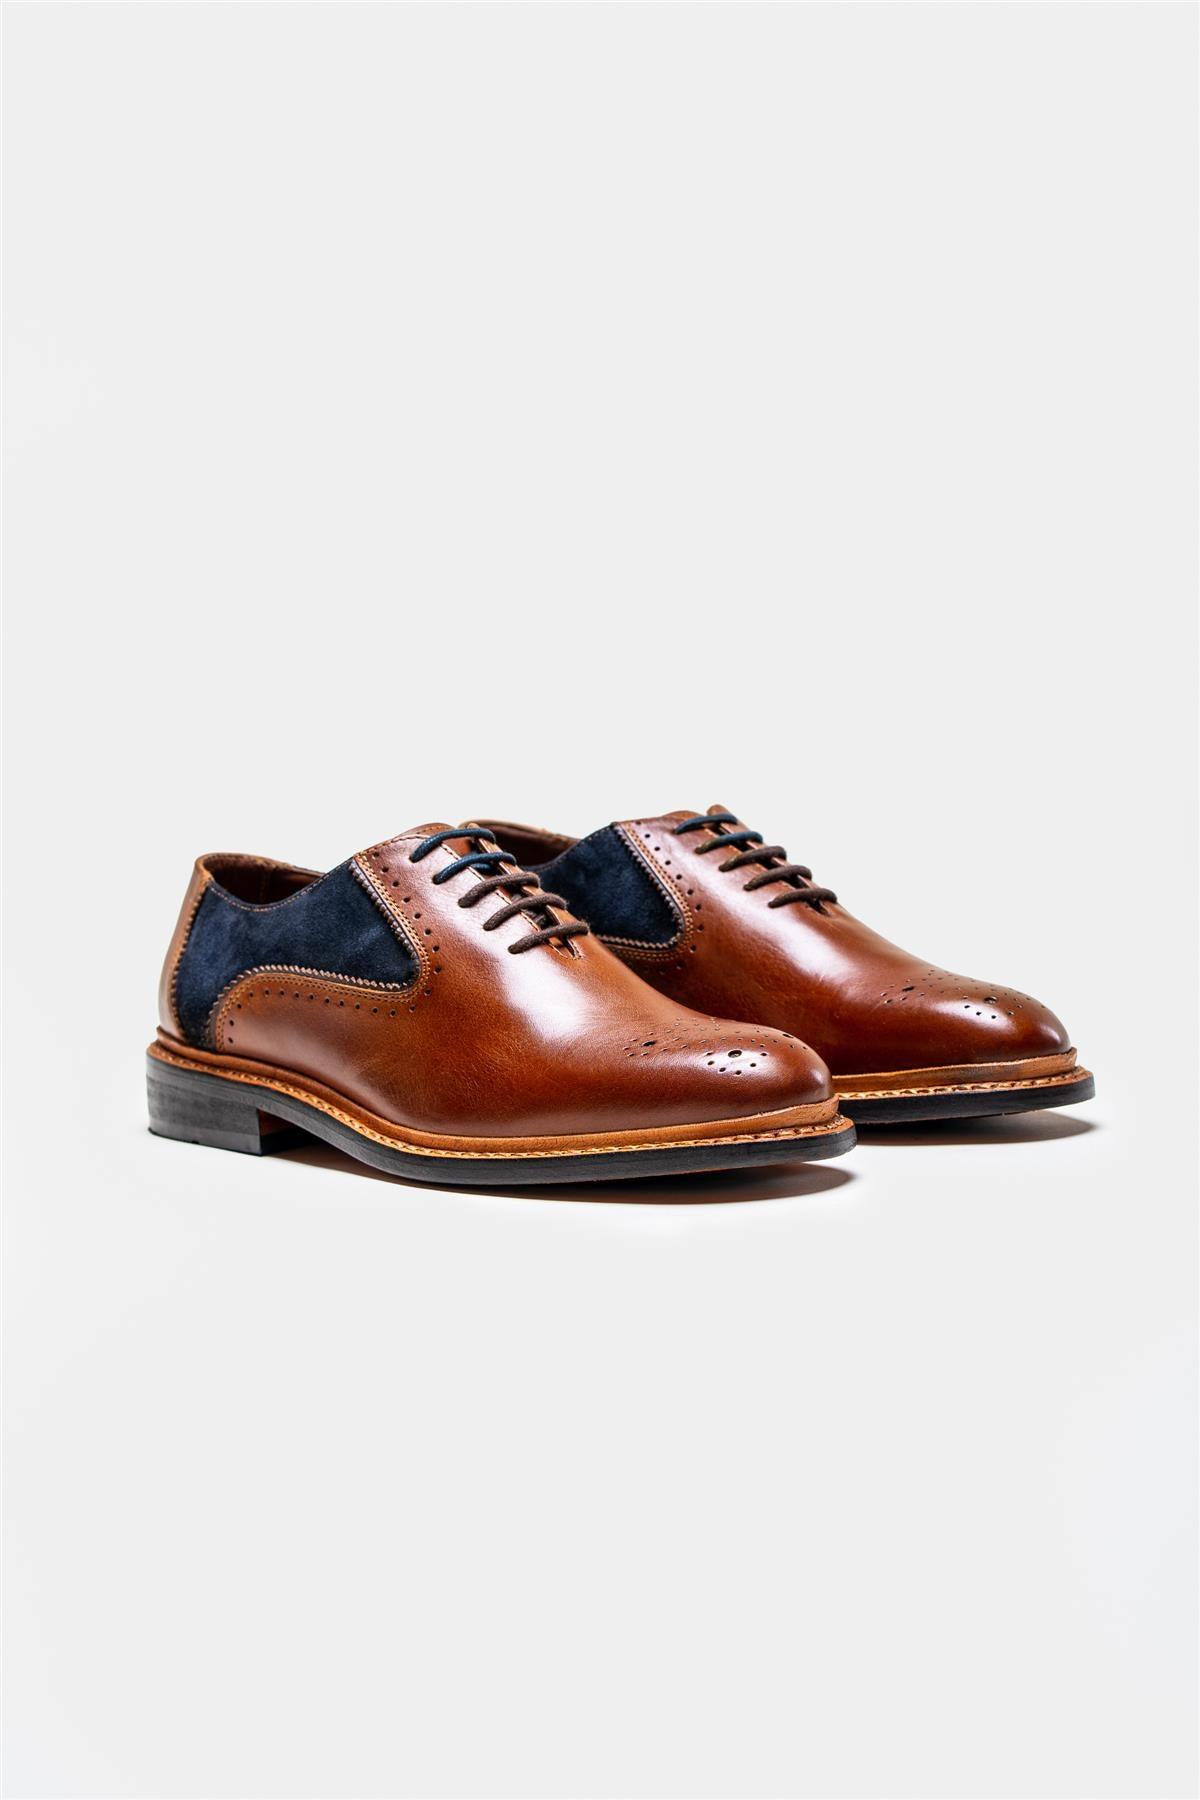 Brentwood tan/navy shoes front